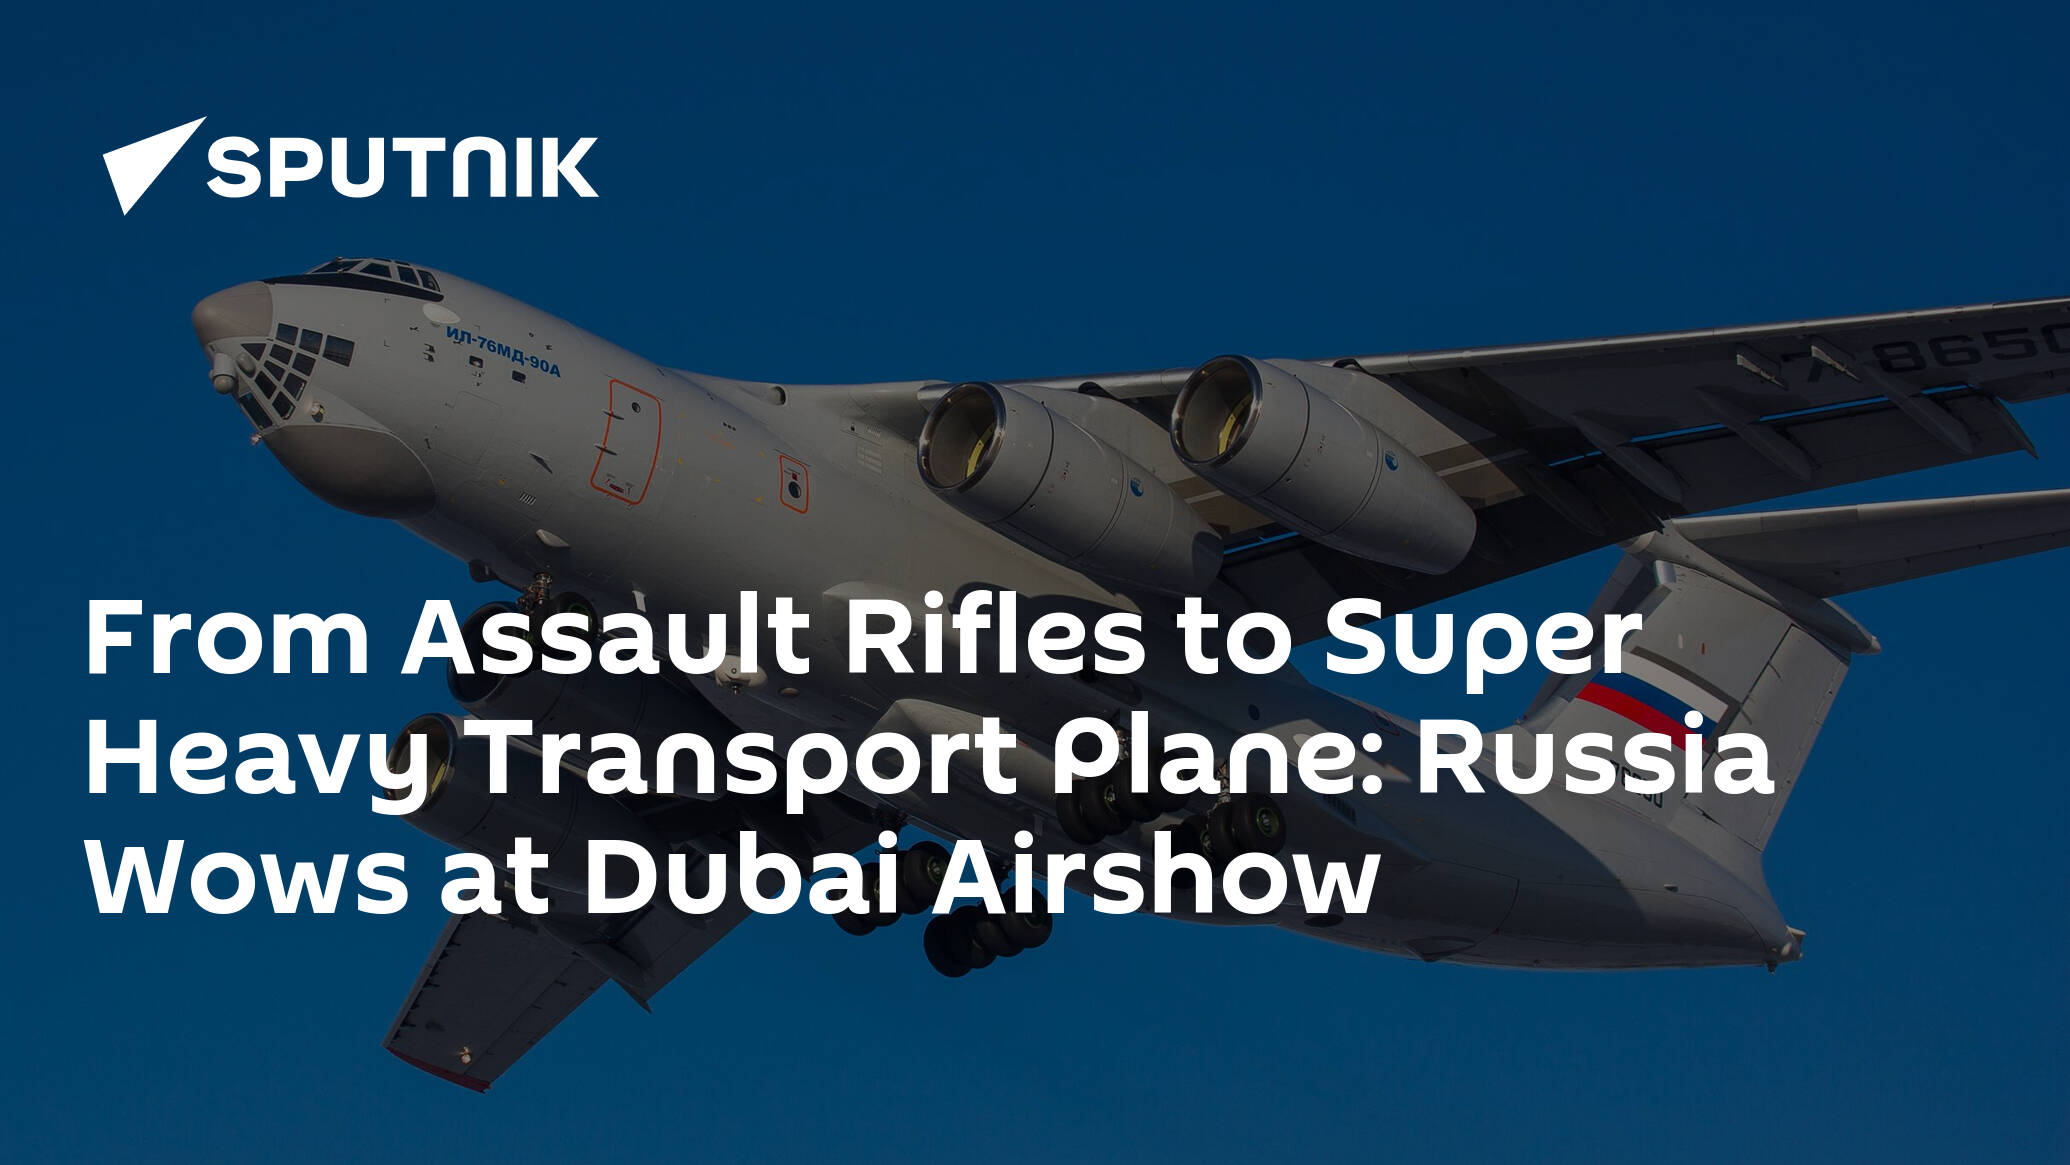 From Assault Rifles to Super Heavy Transport Plane: Russia Wows at Dubai Airshow